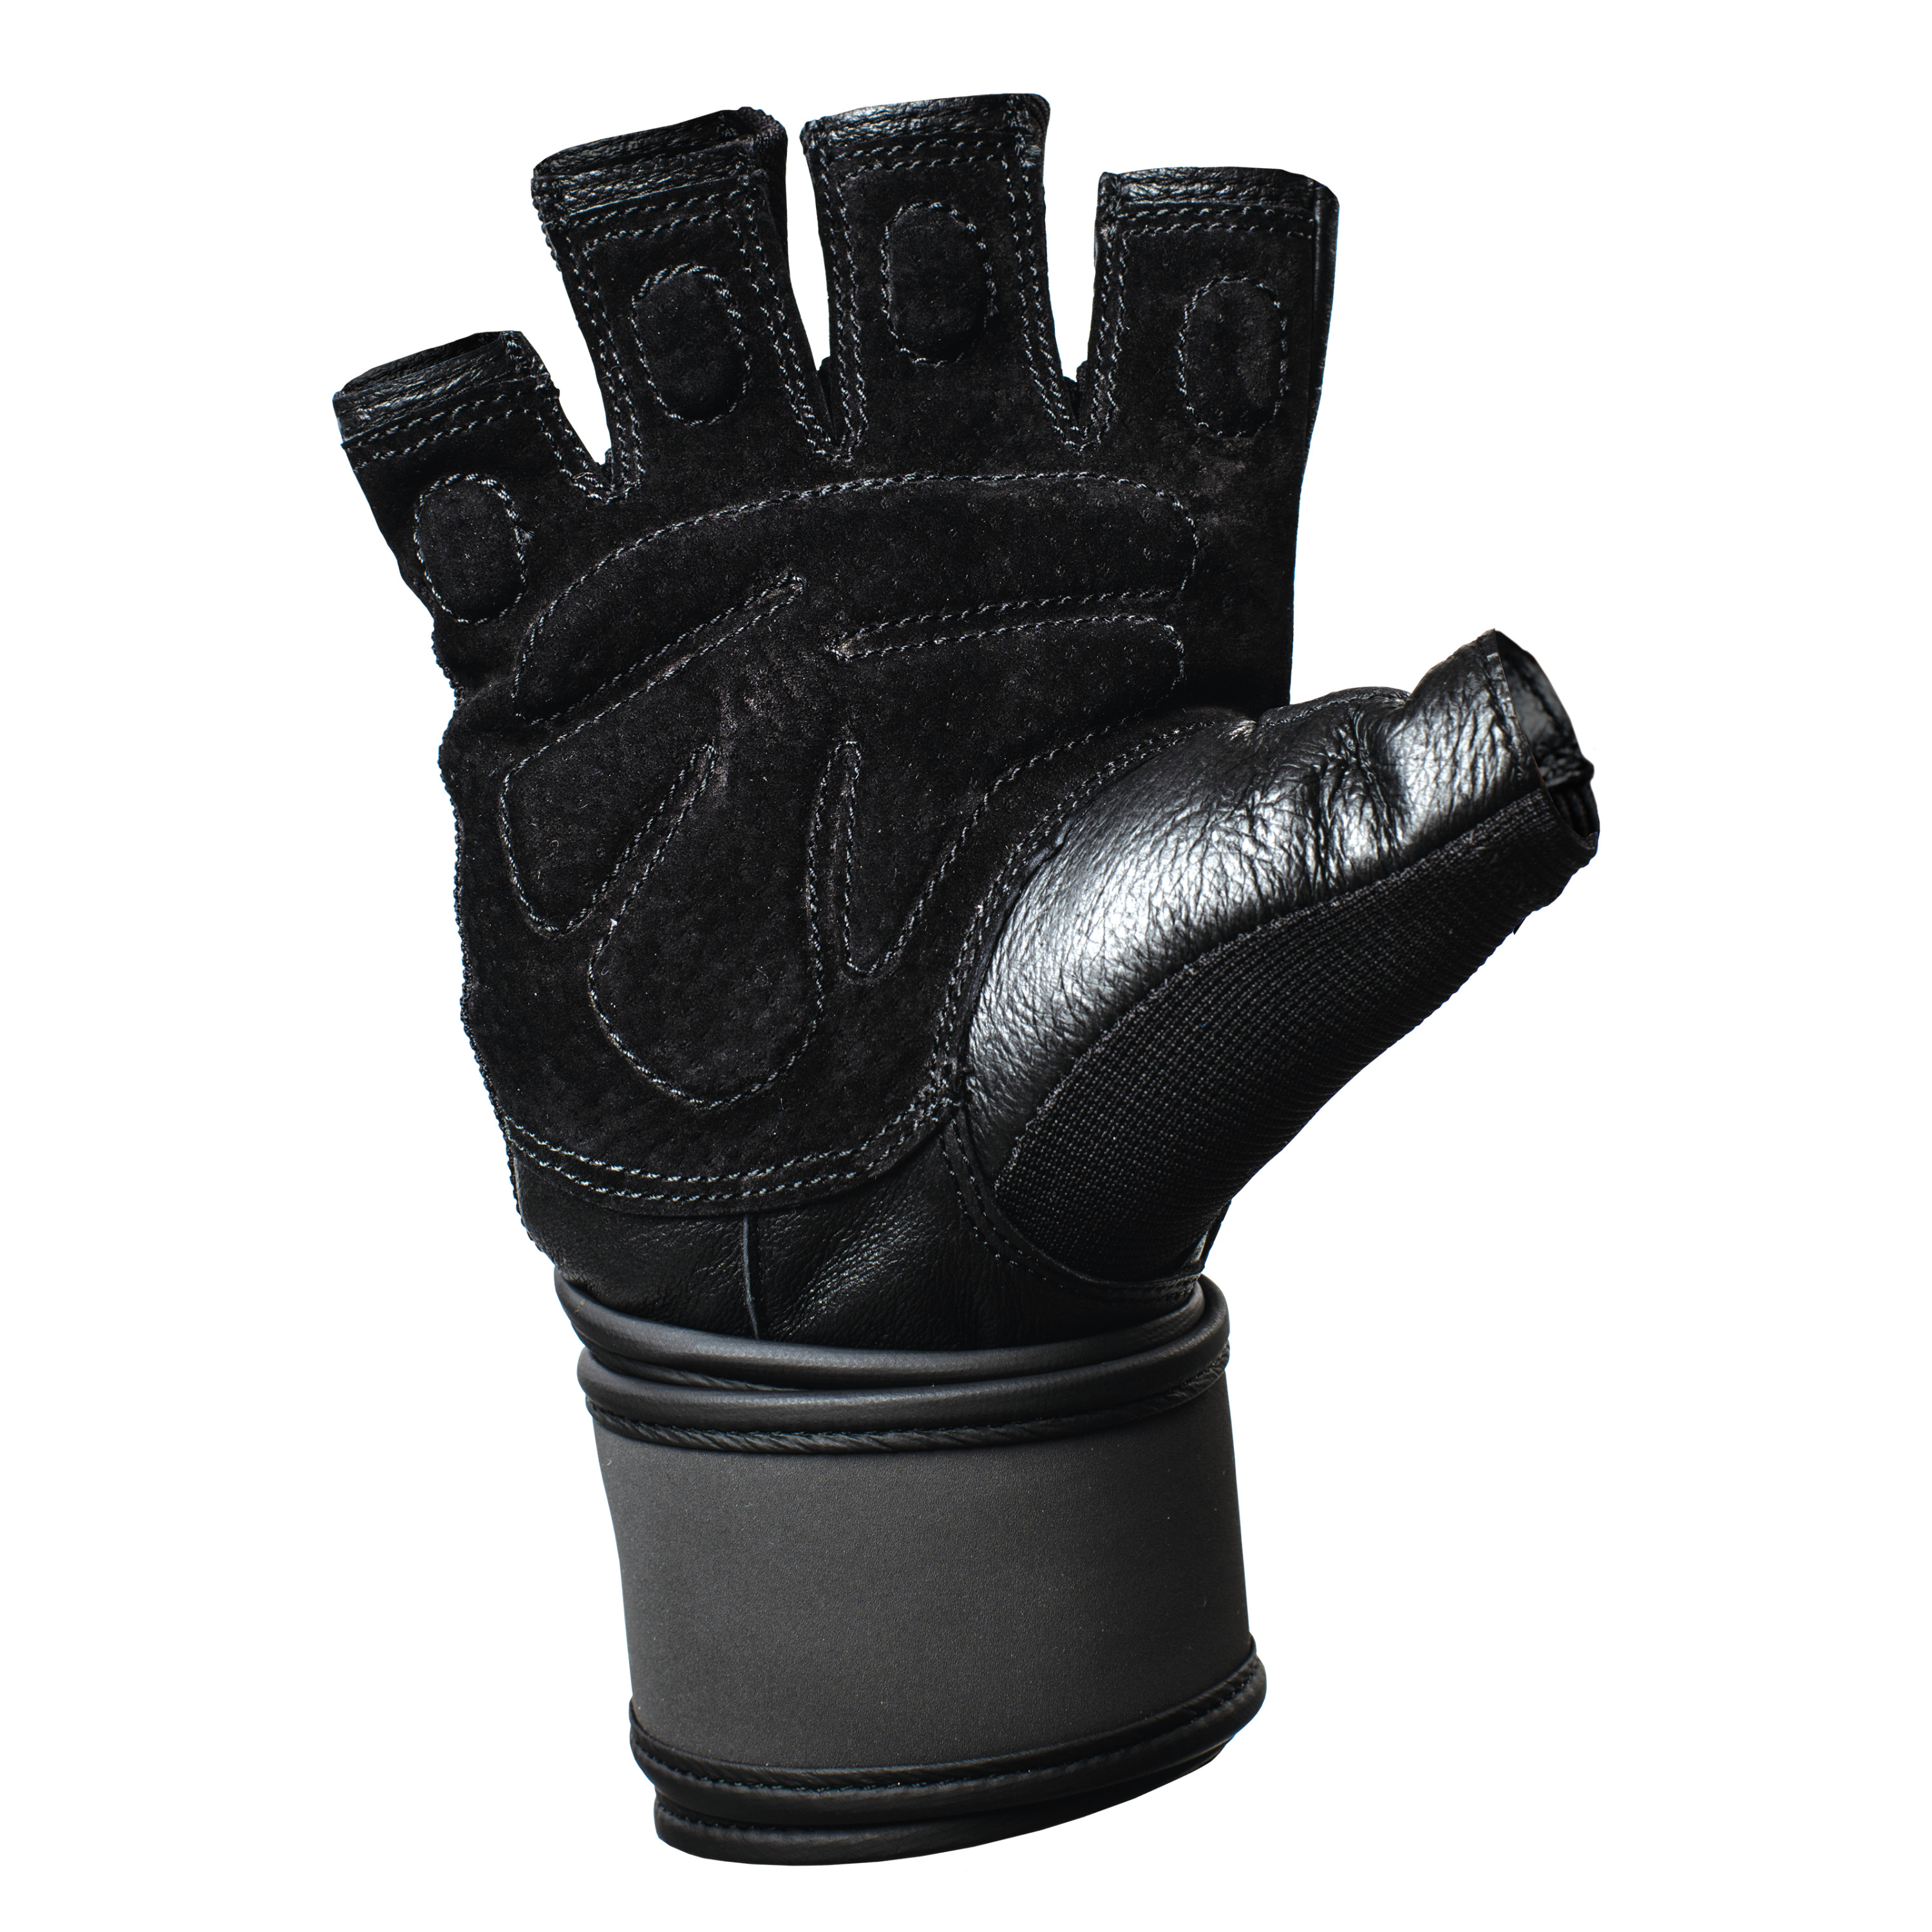 Harbinger Training Grip Wristwrap Weightlifting Gloves with TechGel-Padded Leather Palm (Pair), Small - image 5 of 8